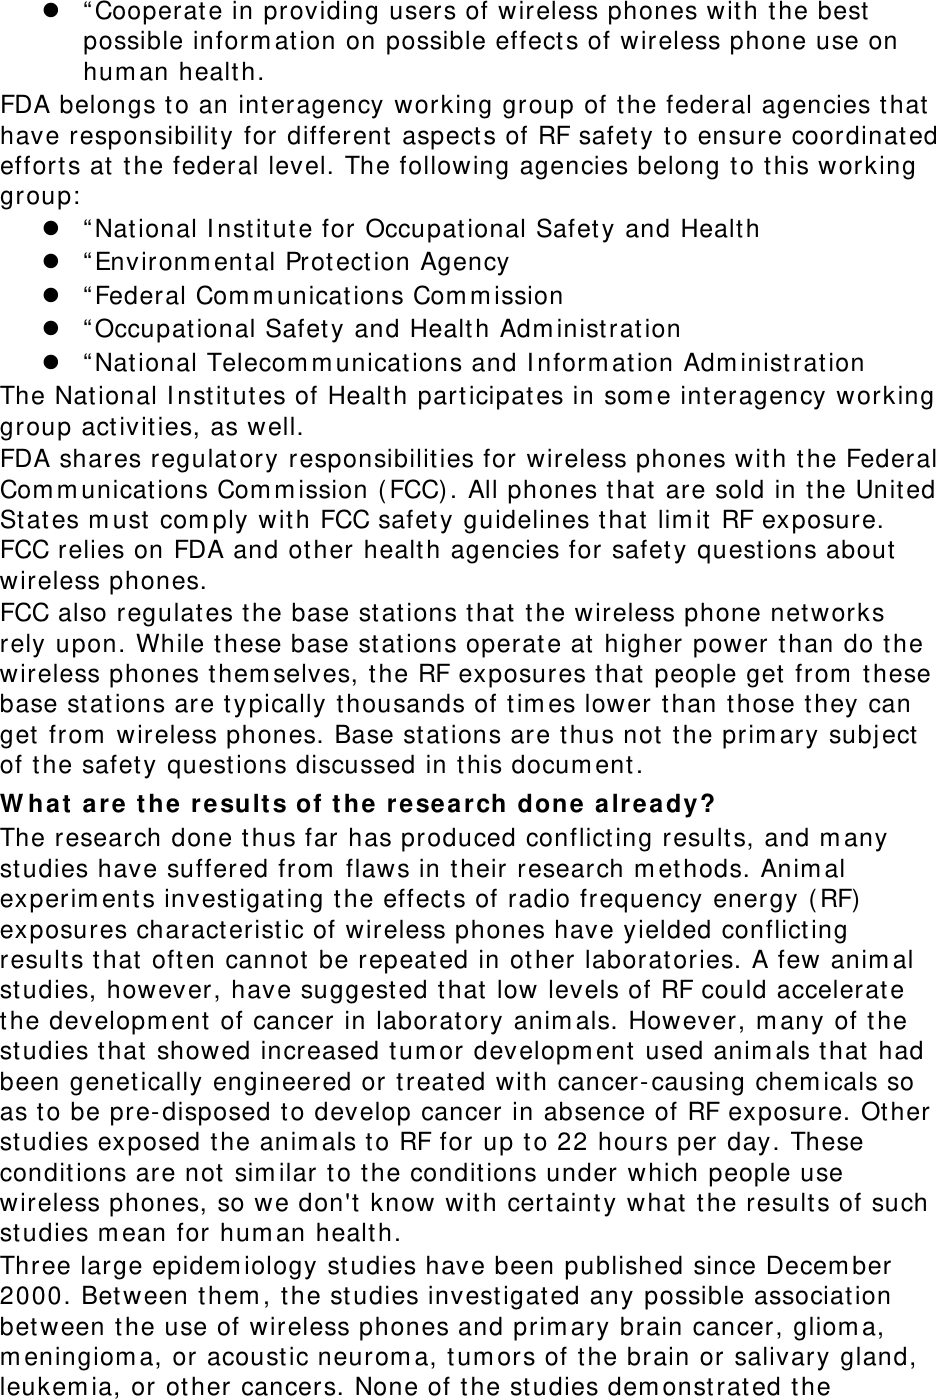  “ Cooperate in providing users of wireless phones wit h the best  possible inform ation on possible effect s of wireless phone use on hum an healt h. FDA belongs t o an int eragency working group of t he federal agencies that  have responsibilit y for different  aspect s of RF safety to ensure coordinat ed effort s at the federal level. The following agencies belong t o t his working group:   “ Nat ional I nstit ut e for Occupational Safety and Health  “ Environm ent al Protect ion Agency  “ Federal Com m unicat ions Com m ission  “ Occupat ional Safety and Health Adm inistrat ion  “ Nat ional Telecom m unications and I nform ation Adm inist ration The Nat ional I nstit utes of Health participates in som e int eragency working group activit ies, as well. FDA shares regulatory responsibilit ies for wireless phones wit h the Federal Com m unicat ions Com m ission ( FCC). All phones that are sold in the United St ates m ust com ply with FCC safety guidelines that lim it RF exposure. FCC relies on FDA and ot her health agencies for safety quest ions about wireless phones. FCC also regulates t he base stat ions t hat  t he wireless phone net works rely upon. While these base st at ions operate at higher power t han do t he wireless phones them selves, the RF exposures that people get  from  t hese base st at ions are t ypically thousands of tim es lower t han those they can get from  wireless phones. Base stat ions are t hus not the prim ary subject of t he safety quest ions discussed in t his docum ent . W ha t  are the r esult s of t he research done alre ady? The research done thus far has produced conflict ing results, and m any studies have suffered from  flaws in t heir research m et hods. Anim al experim ent s invest igating the effect s of radio frequency energy ( RF)  exposures charact erist ic of wireless phones have yielded conflict ing results that oft en cannot be repeated in other laborat ories. A few anim al studies, however, have suggest ed t hat low levels of RF could accelerate the developm ent  of cancer in laborat ory anim als. However, m any of t he studies that showed increased t um or developm ent used anim als that had been genetically engineered or treat ed wit h cancer-causing chem icals so as to be pre-disposed t o develop cancer in absence of RF exposure. Ot her studies exposed t he anim als to RF for up t o 22 hours per day. These condit ions are not  sim ilar to the condit ions under which people use wireless phones, so we don&apos;t  know with certaint y what  t he result s of such studies m ean for hum an health. Three large epidem iology st udies have been published since Decem ber 2000. Between them , t he st udies invest igat ed any possible associat ion between t he use of wireless phones and prim ary brain cancer, gliom a, m eningiom a, or acoustic neurom a, tum ors of t he brain or salivary gland, leukem ia, or other cancers. None of t he studies dem onst rated t he 